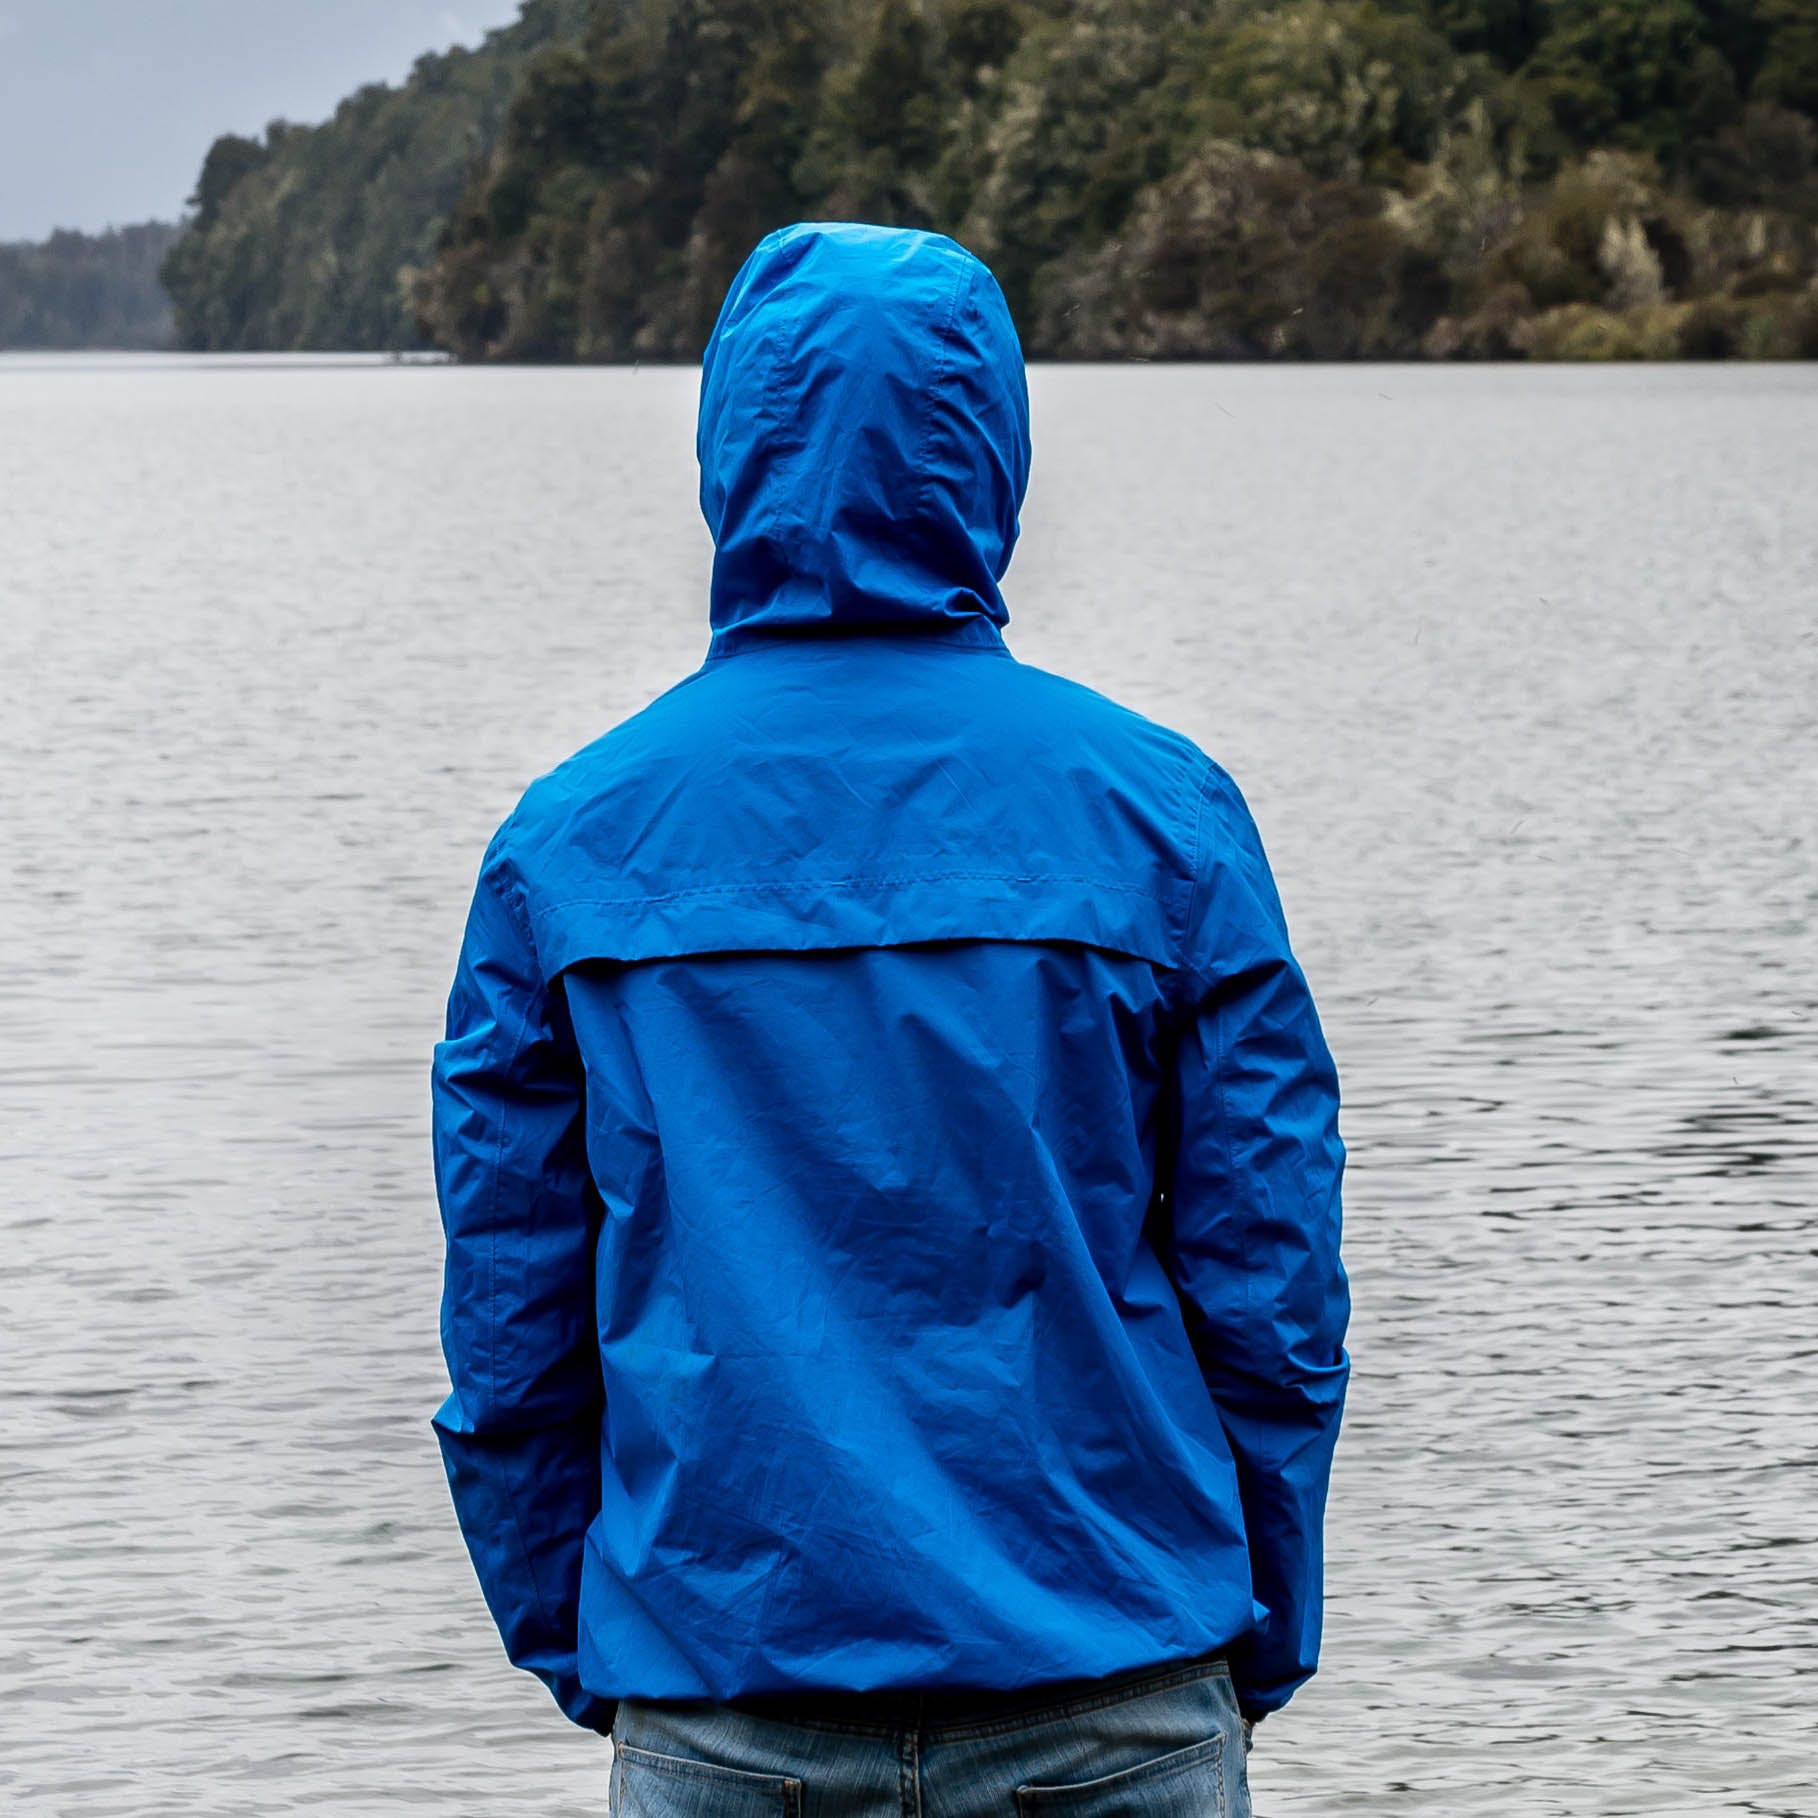 Blue,Cobalt blue,Clothing,Jacket,Outerwear,Hood,Hoodie,Sleeve,Electric blue,Turquoise